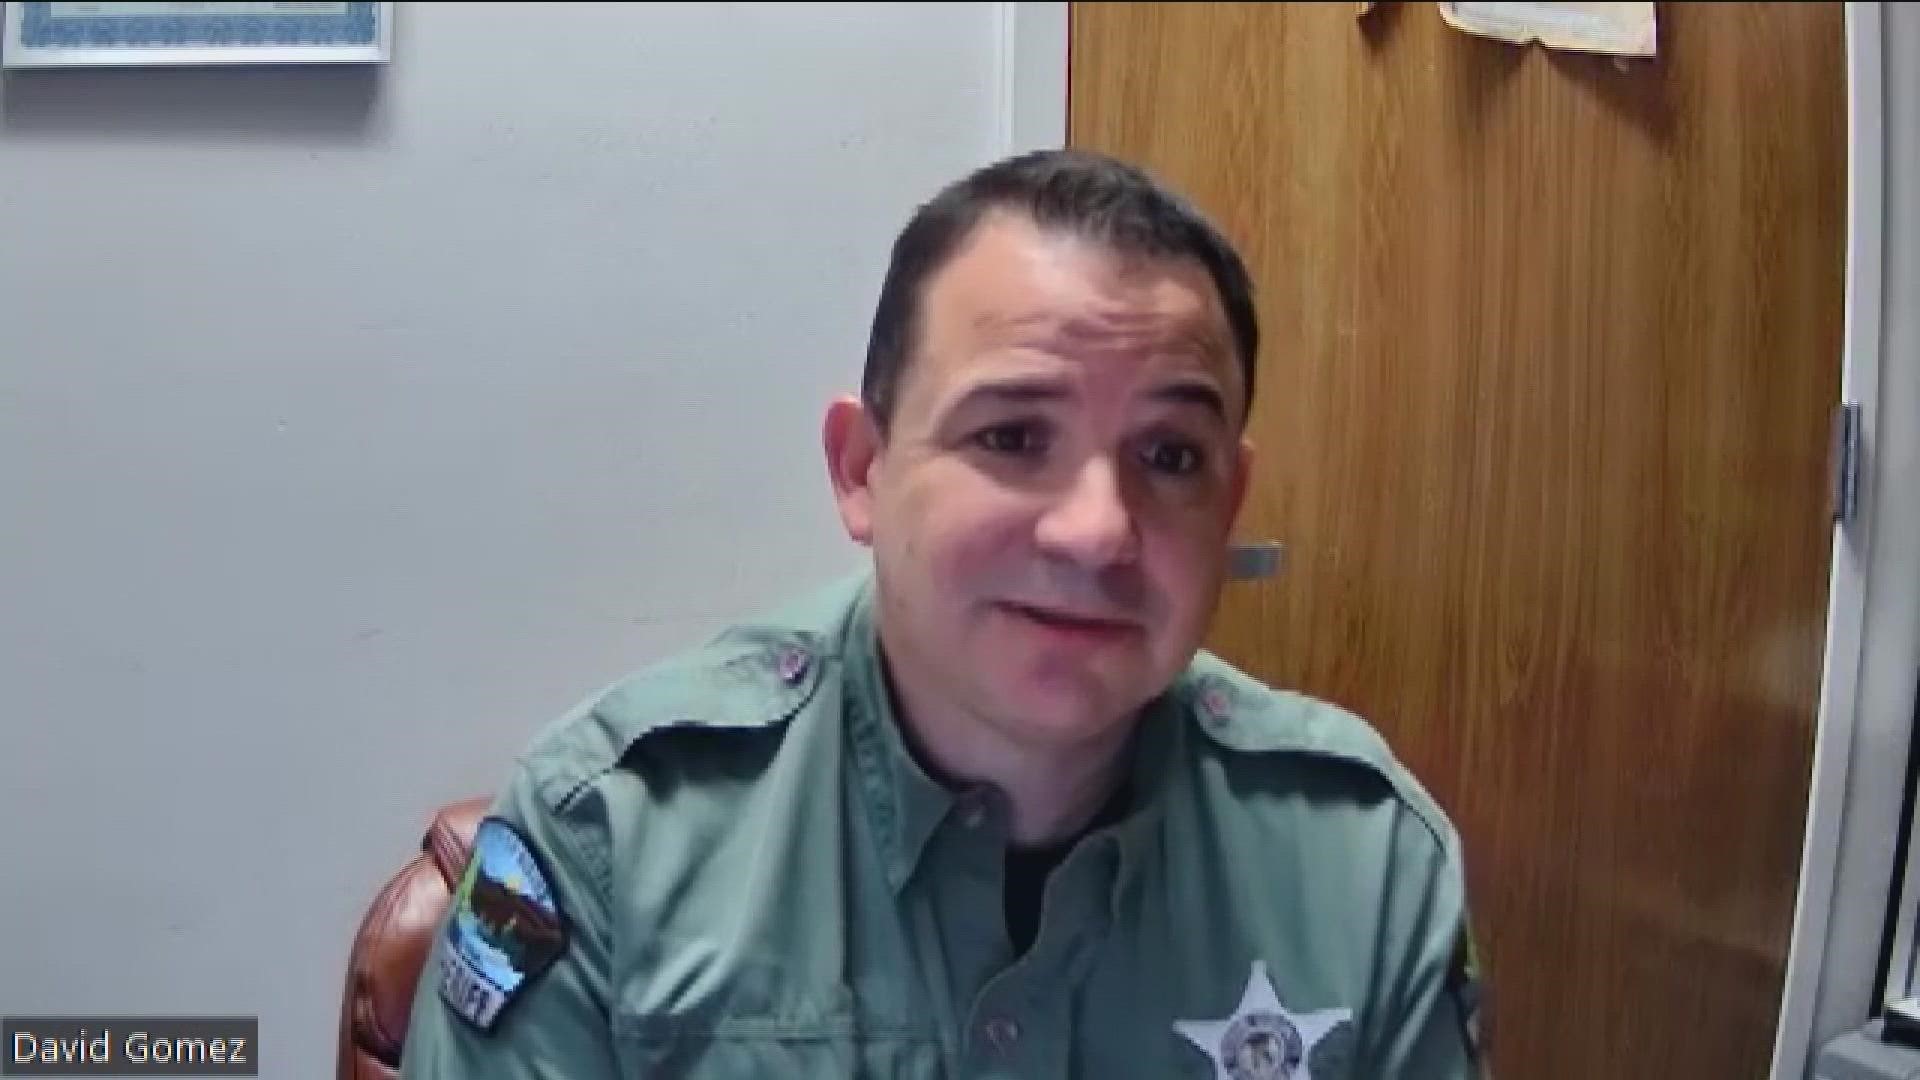 Have you heard of Officer Gomez? His Facebook page has close to 100k followers. His goal is to help parents navigate the dangers teenagers face today.